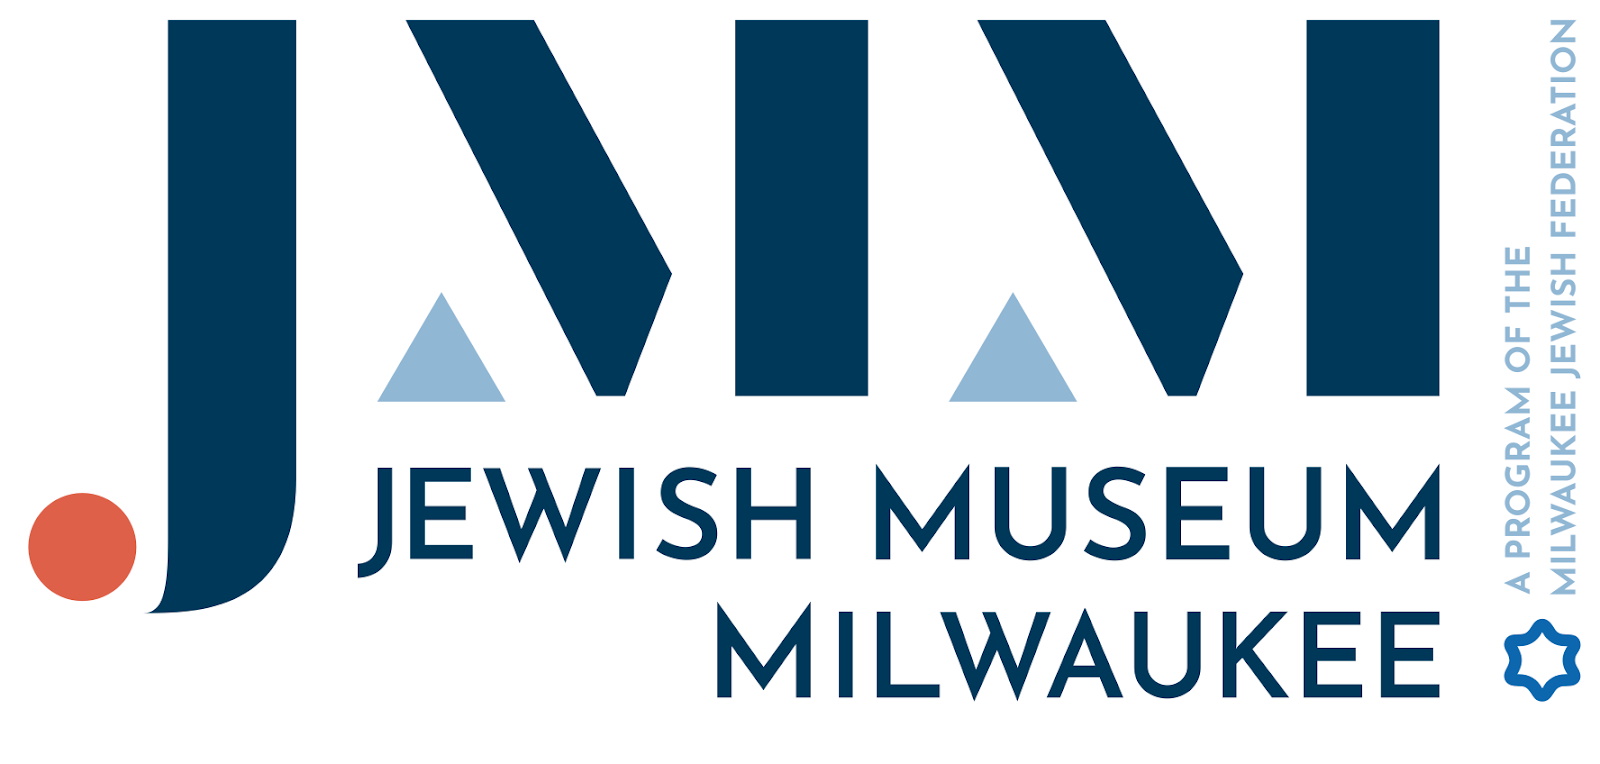 New Chagall Exhibition Coming to Jewish Museum Milwaukee